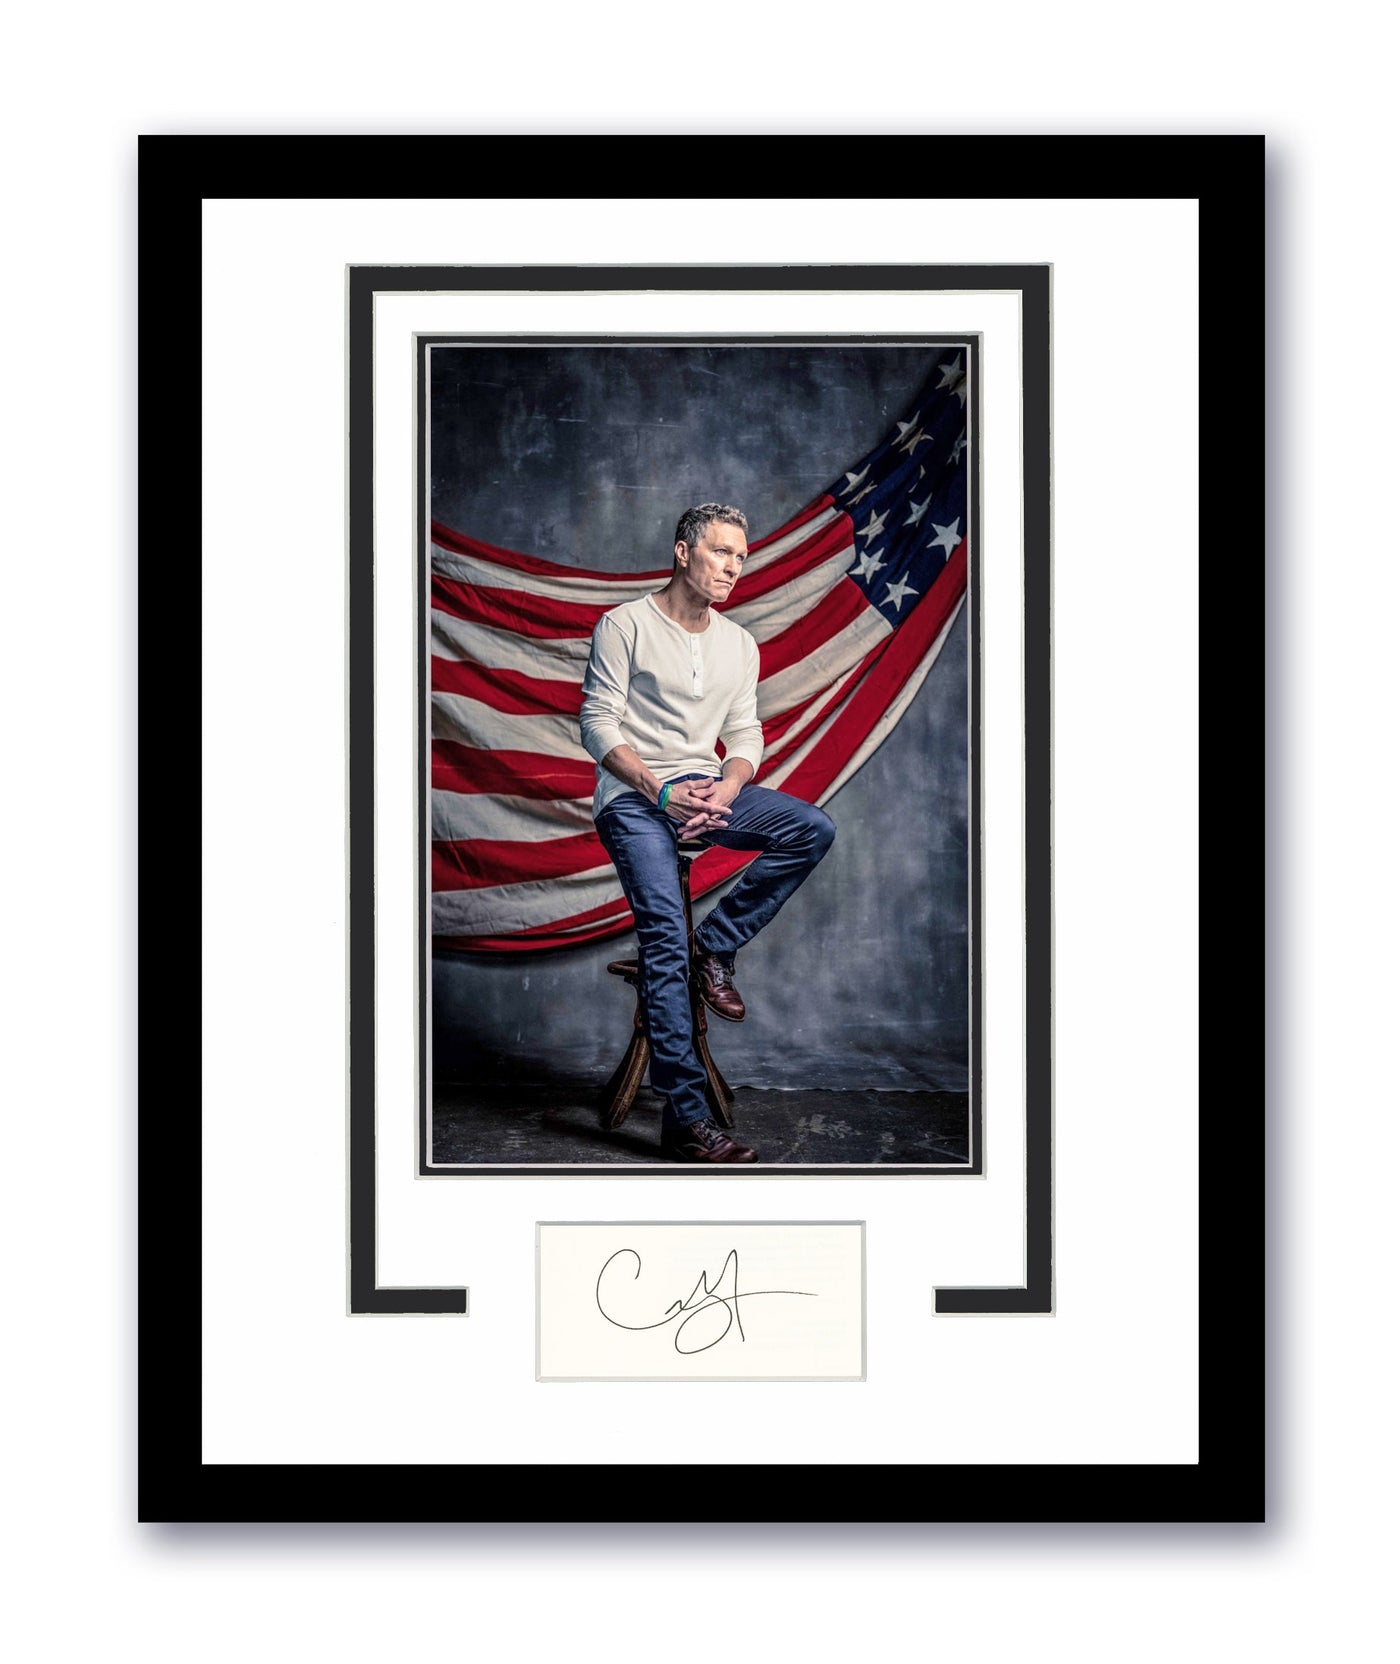 Craig Morgan Autographed Signed 11x14 Framed Photo Country Music ACOA